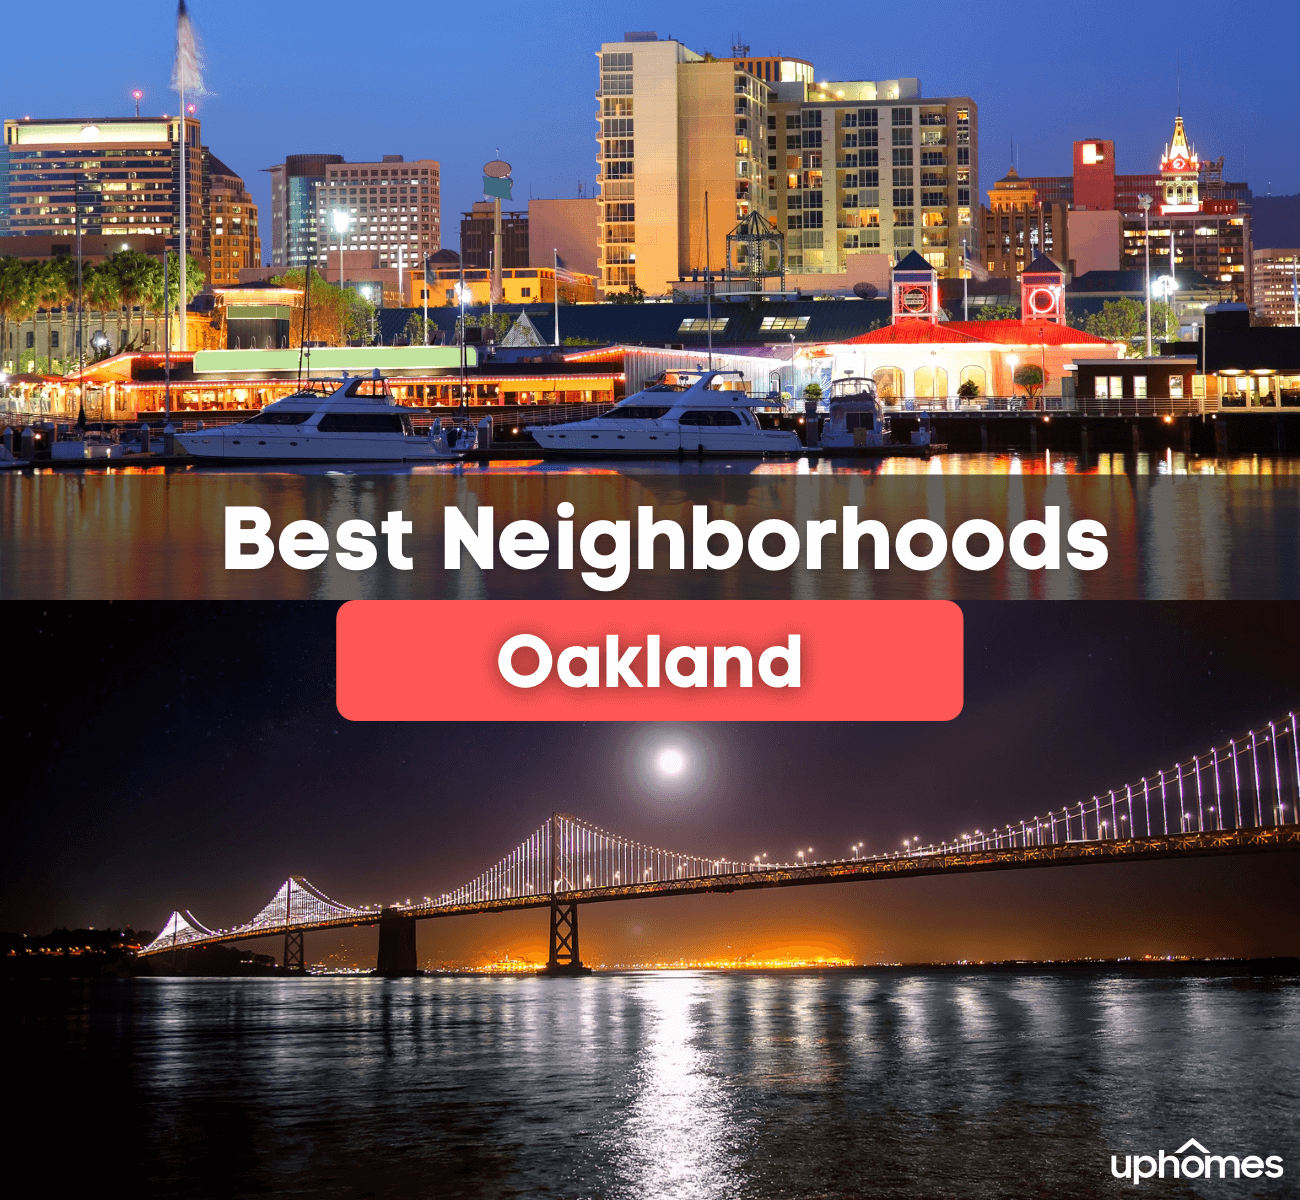 Best neighborhoods in Oakland, CA - What are the best places to live in Oakland, California?